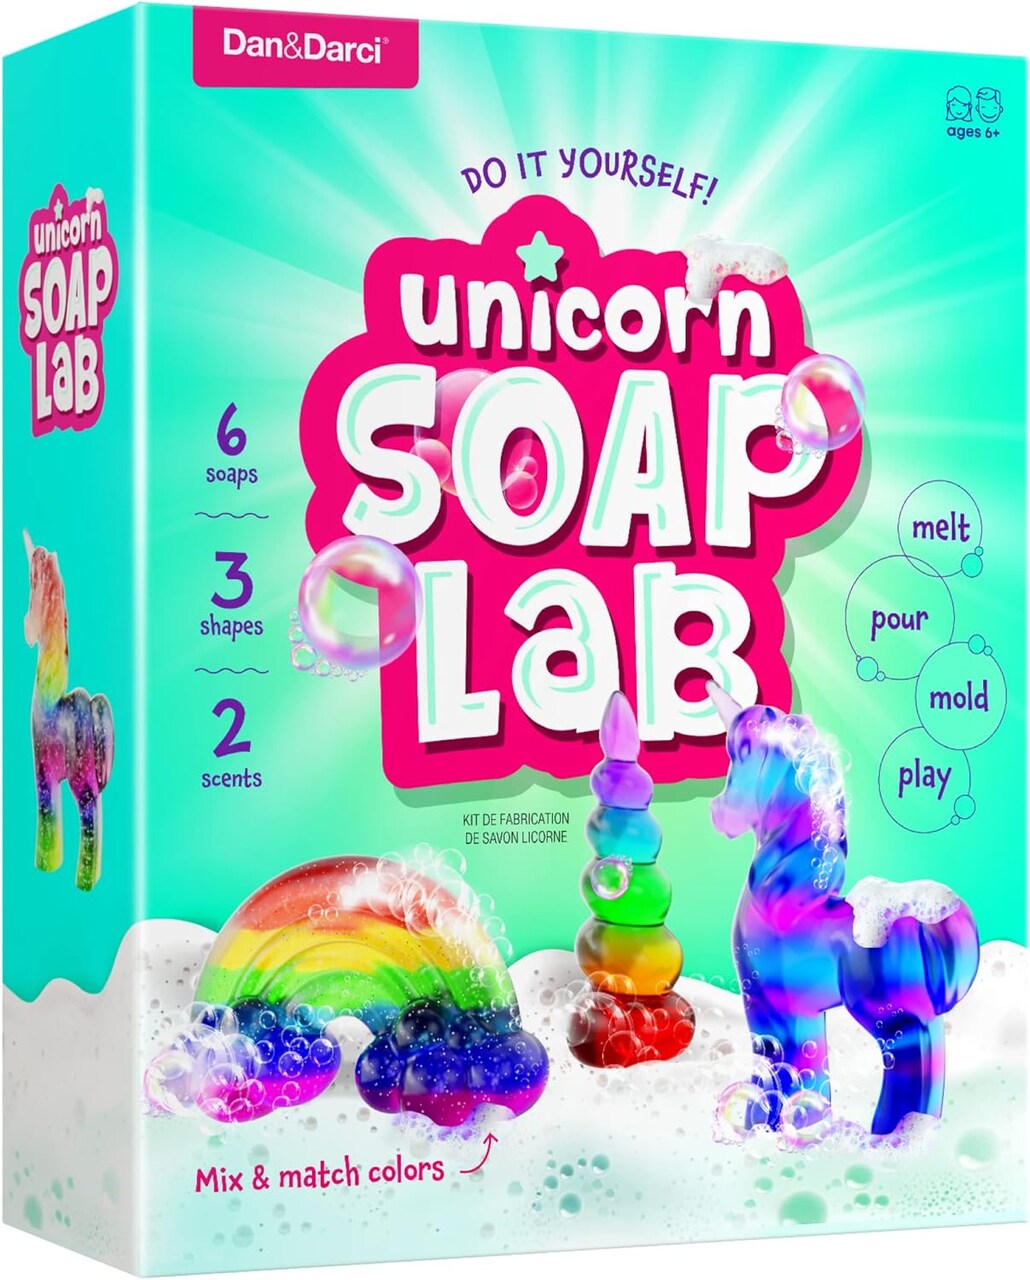 Unicorn Soap Making Kit - Girls Crafts DIY Project Age 6+ Year Old Kids Girl  Gifts Science STEM Activity Teenage Christmas Gift Make Your Own Kits